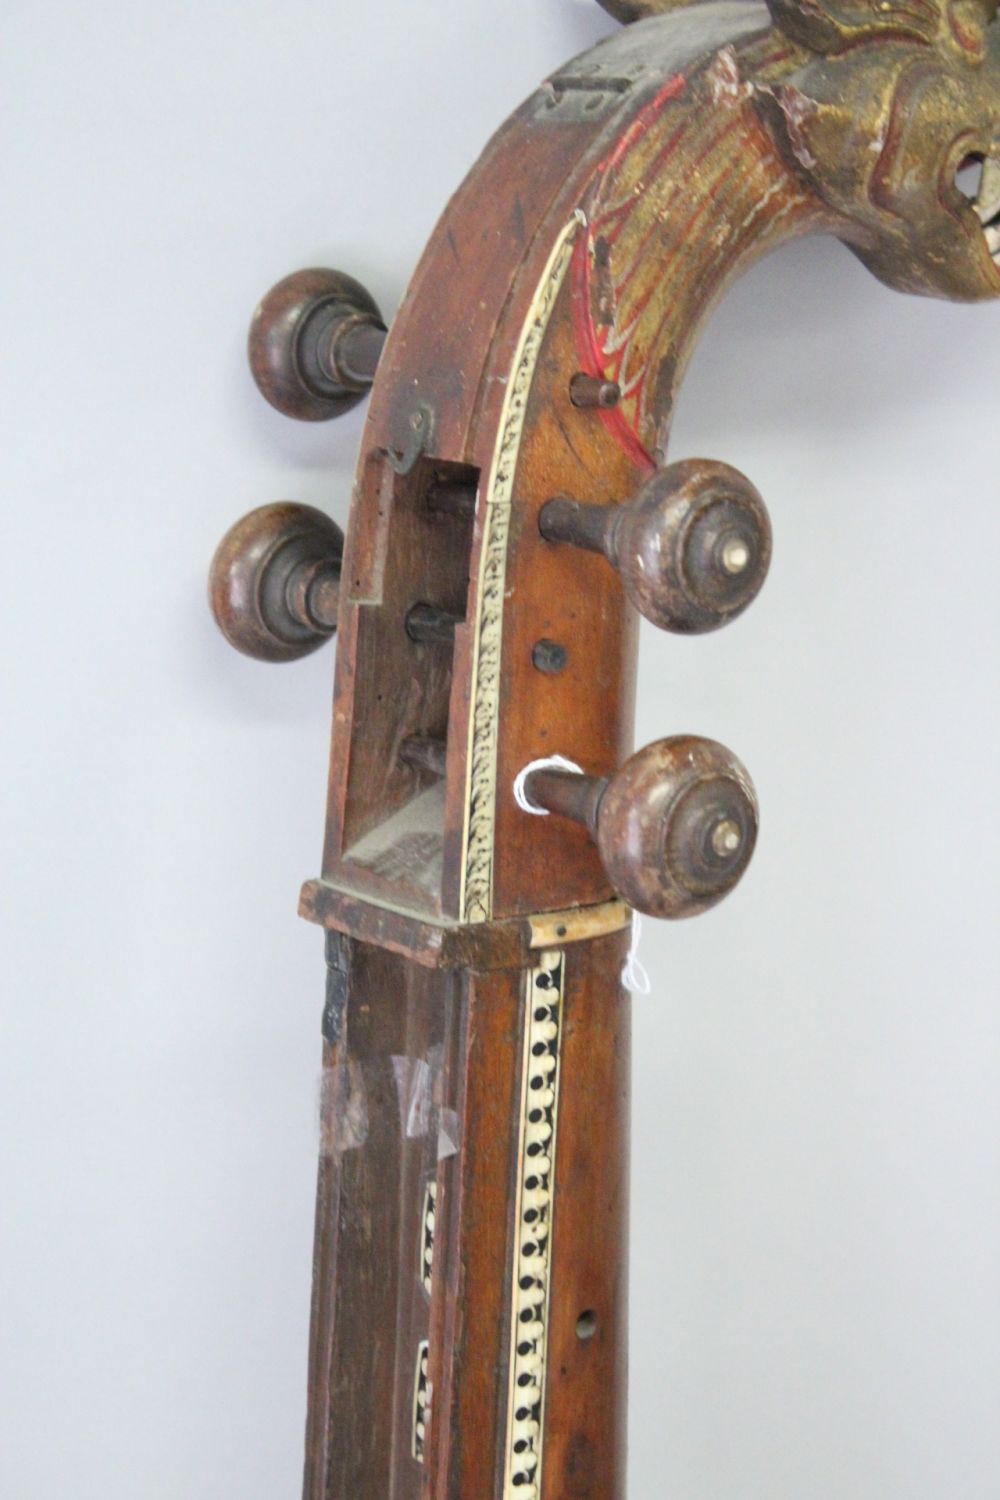 A LARGE 17TH CENTURY SOUTH INDIAN SITAR with carved dragon handle, 120cm long. - Image 4 of 5